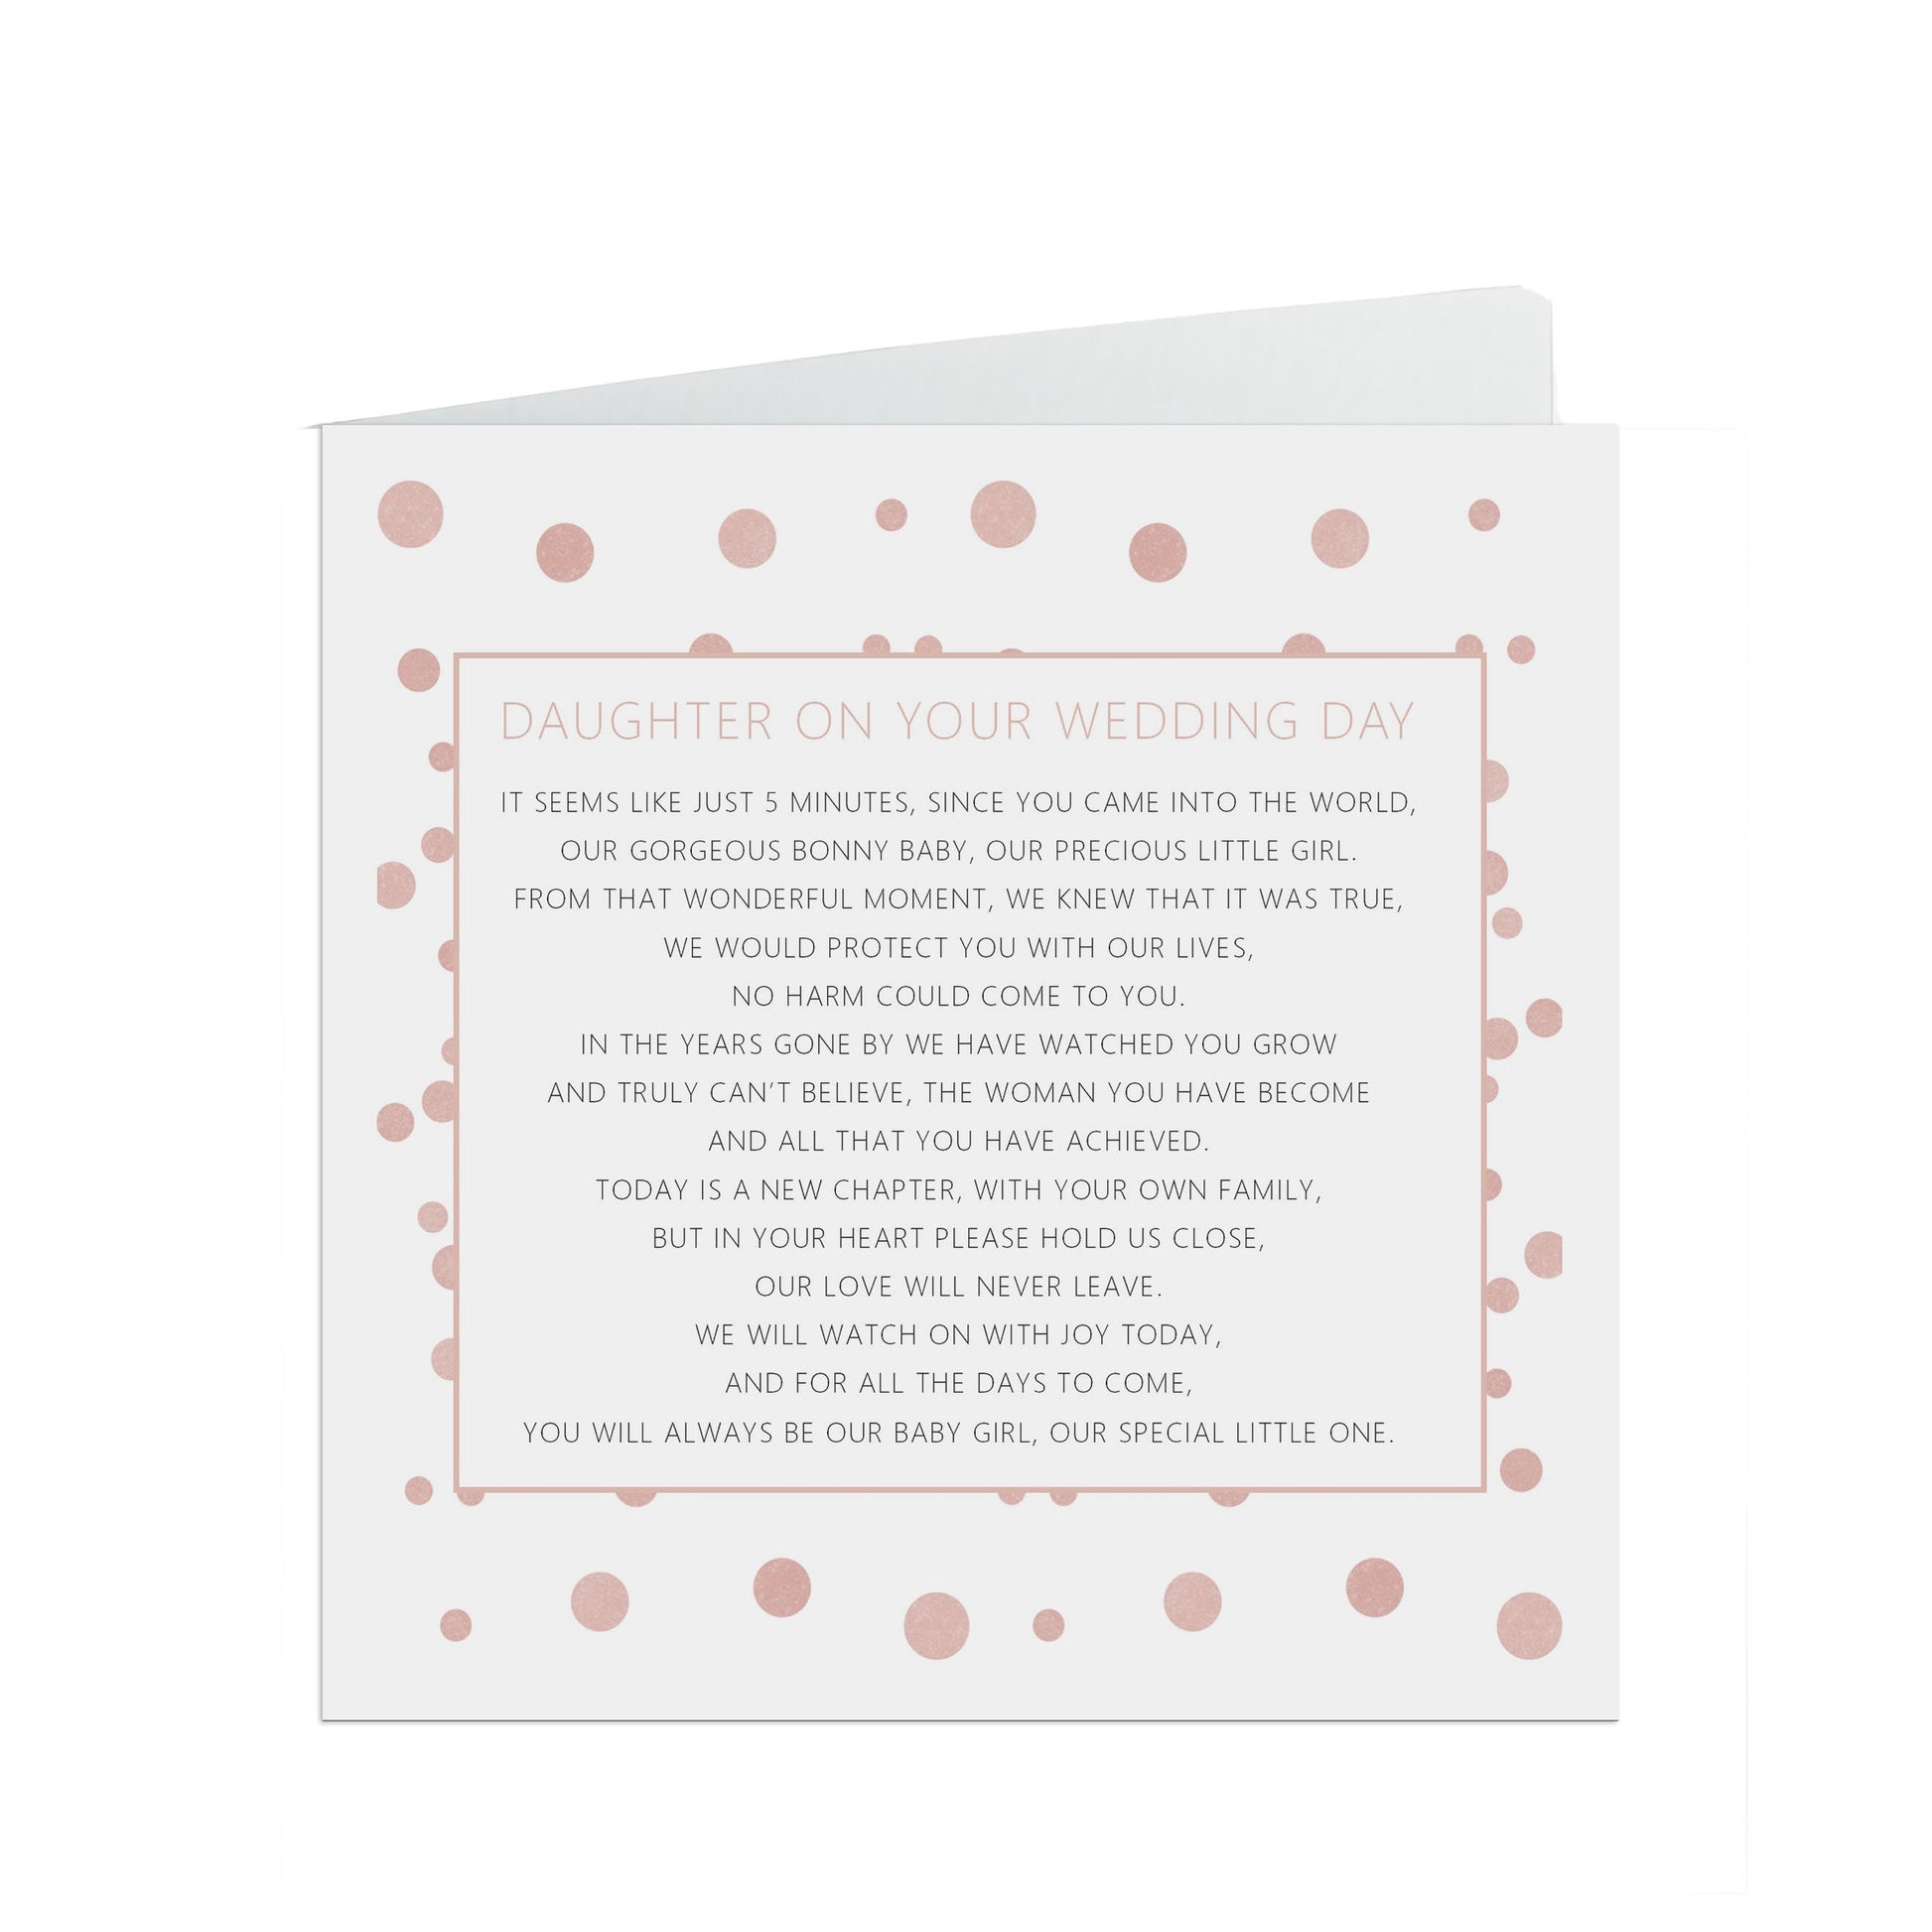 Daughter On Your Wedding Day Card, Blush Confetti 6x6 Inches With A White Envelope